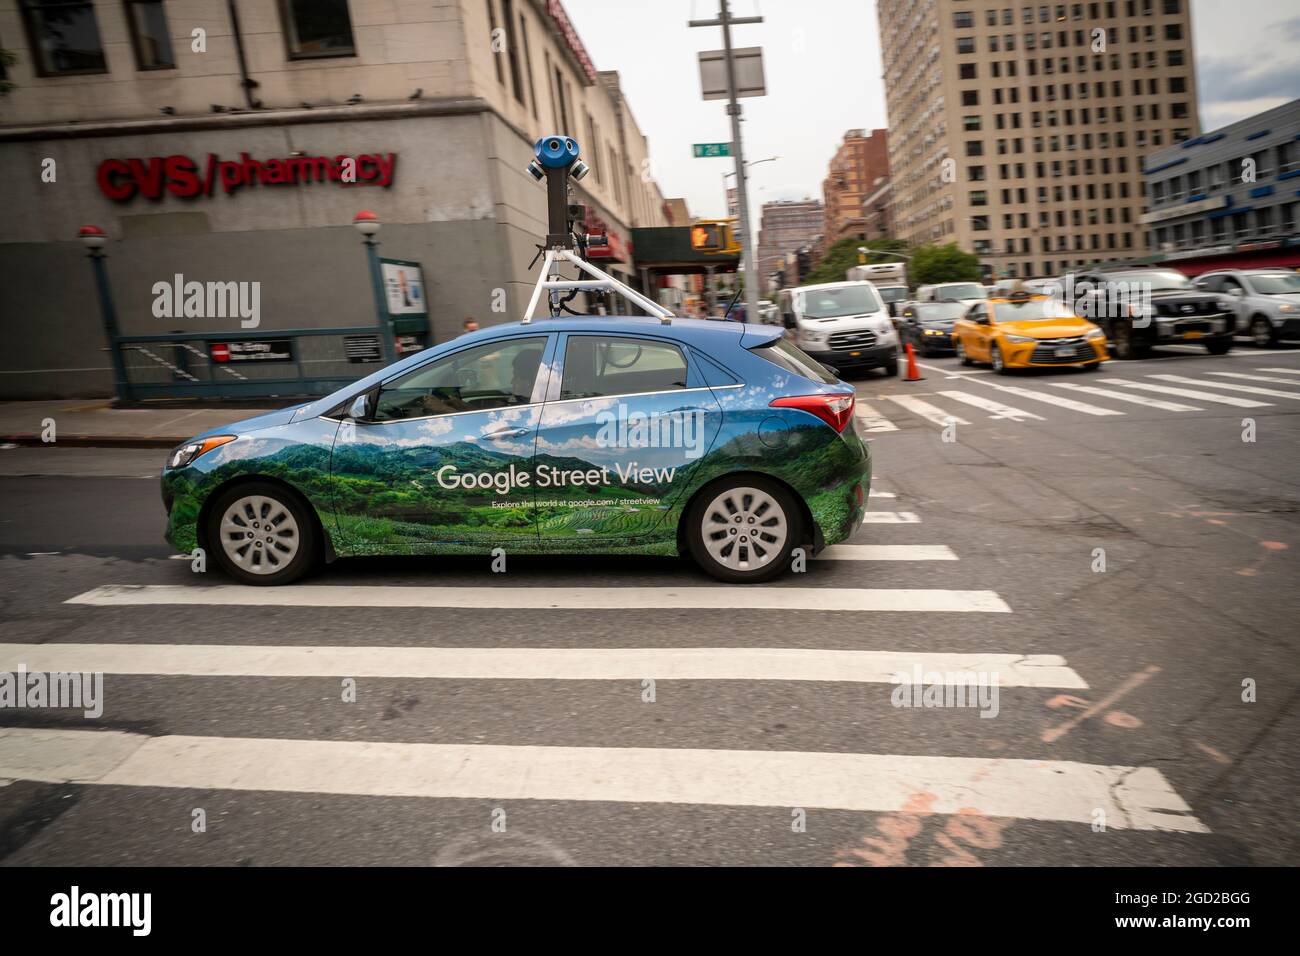 A Google Street View vehicle in Chelsea in New York on Tuesday, August 3, 2021.  (© Richard B. Levine) Stock Photo